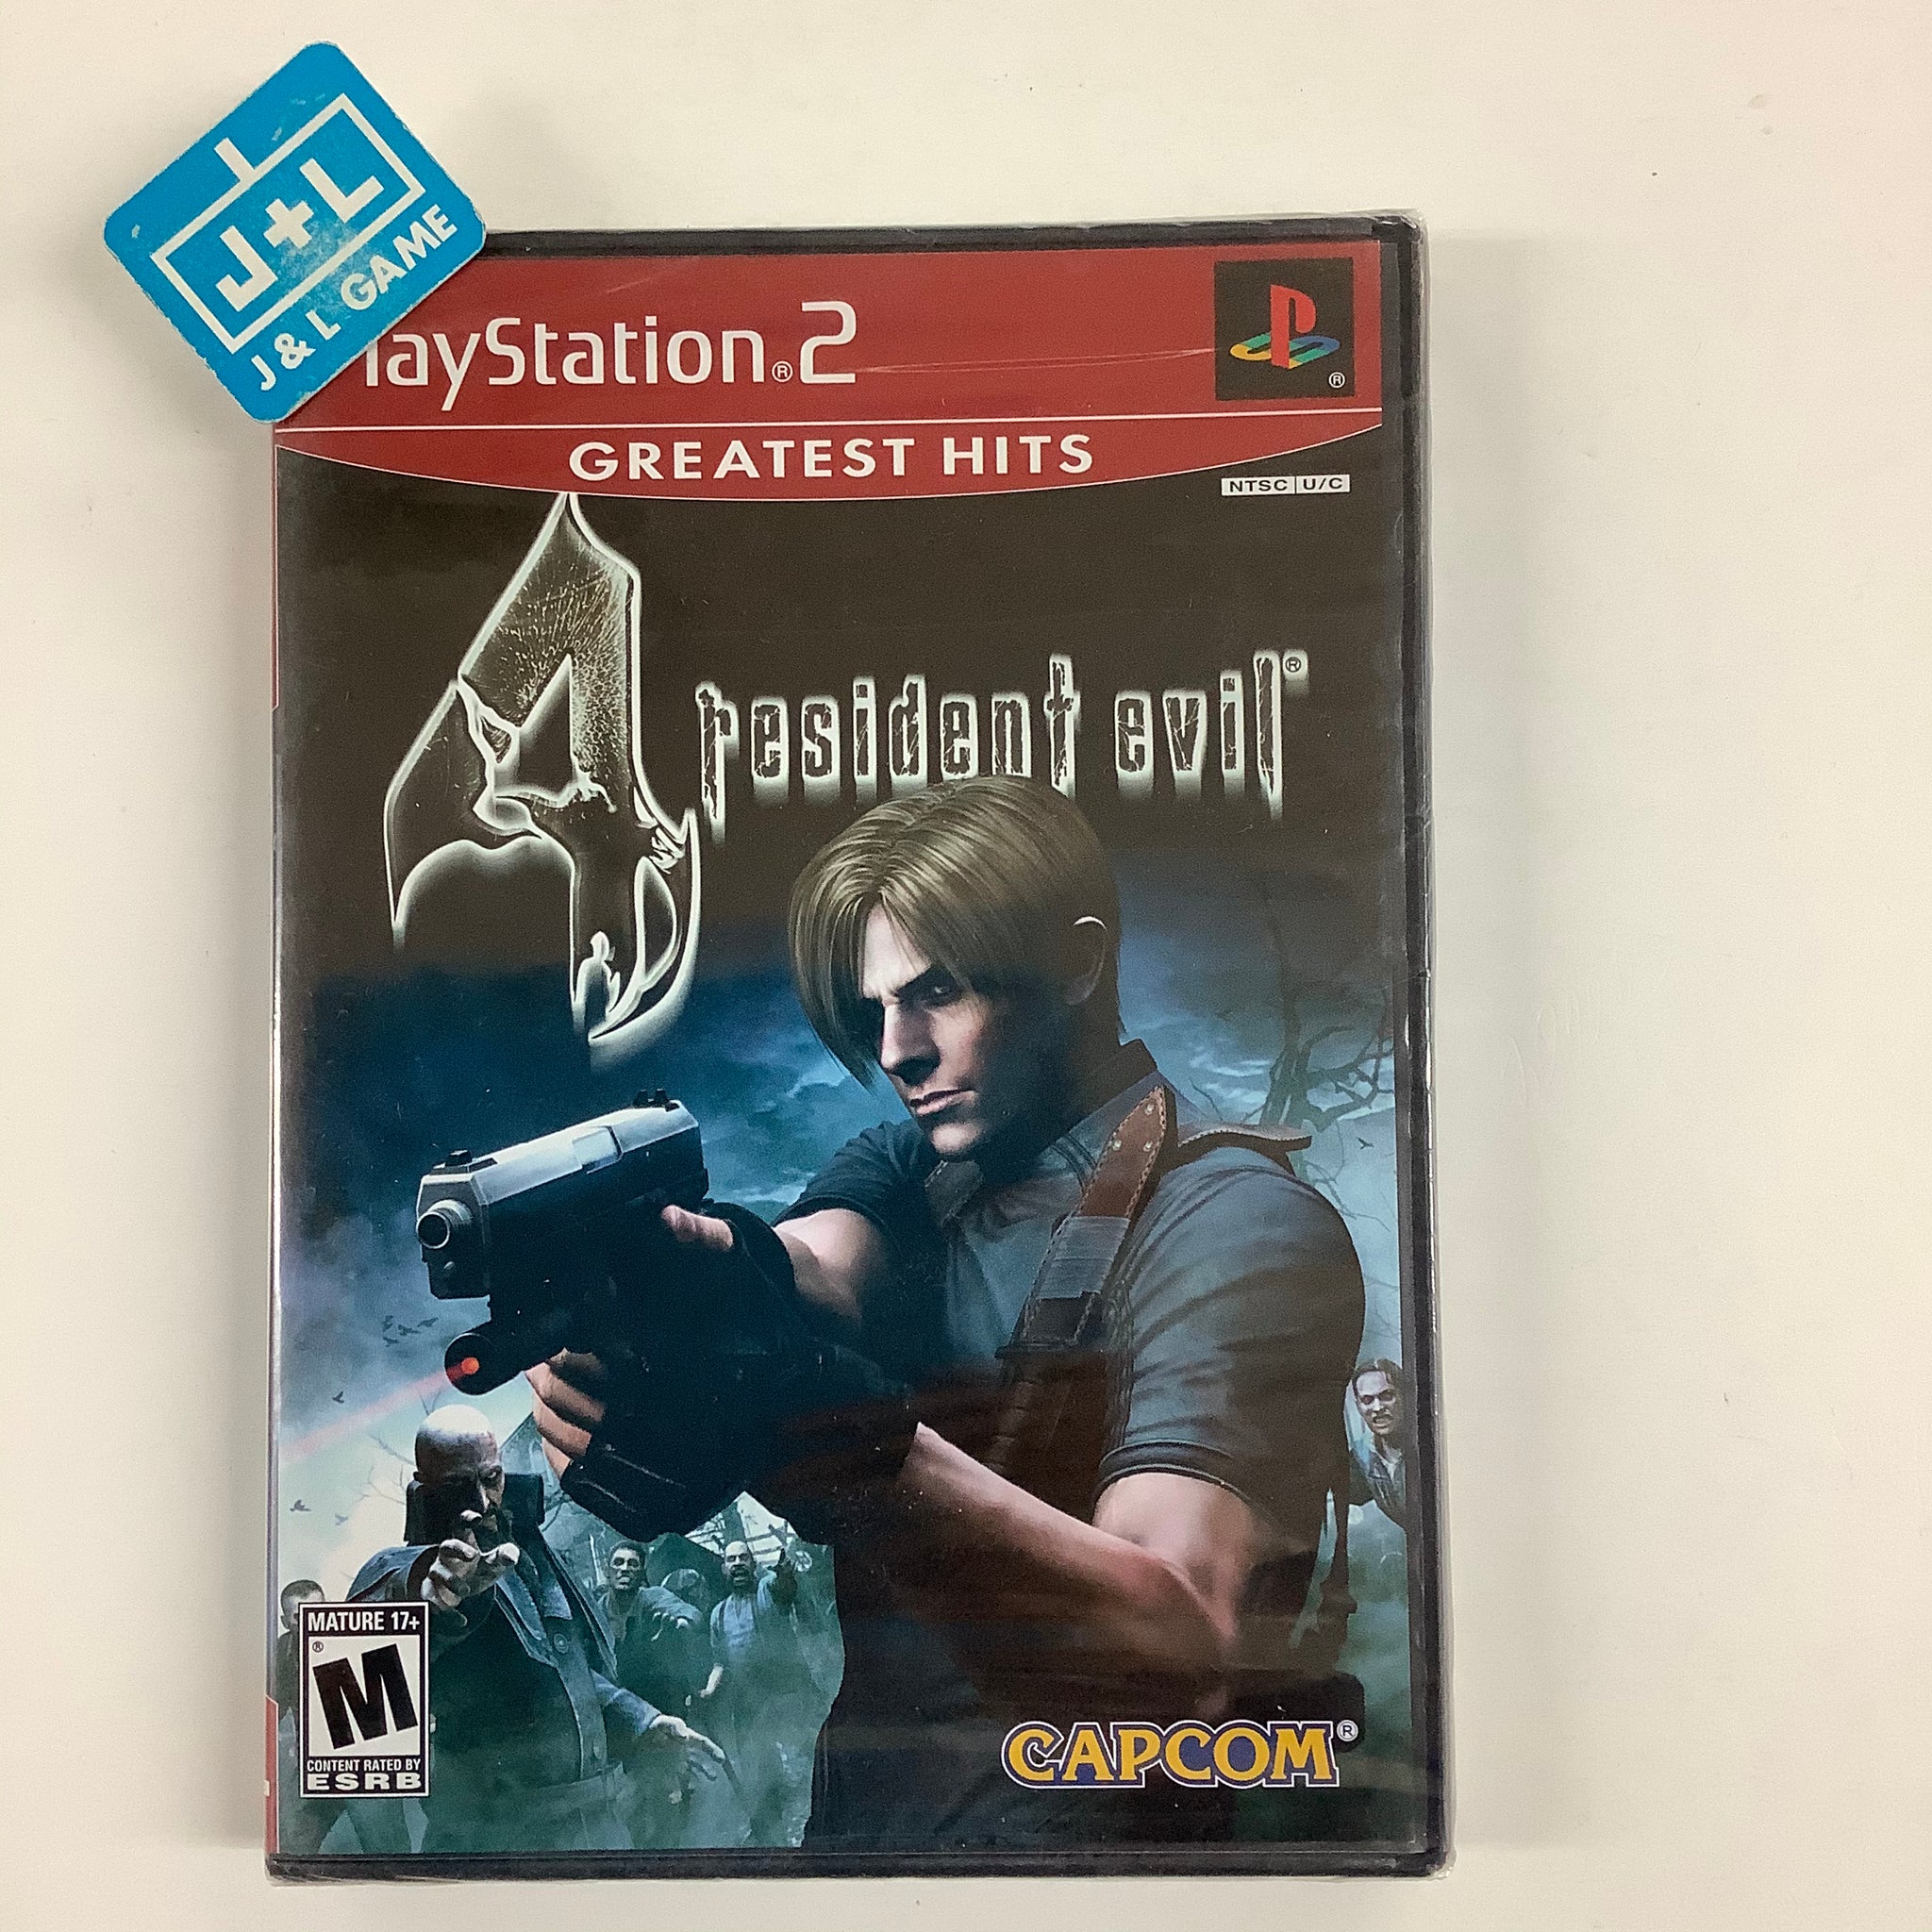 Resident Evil 4 (greatest Hits) - Playstation 2 : Target